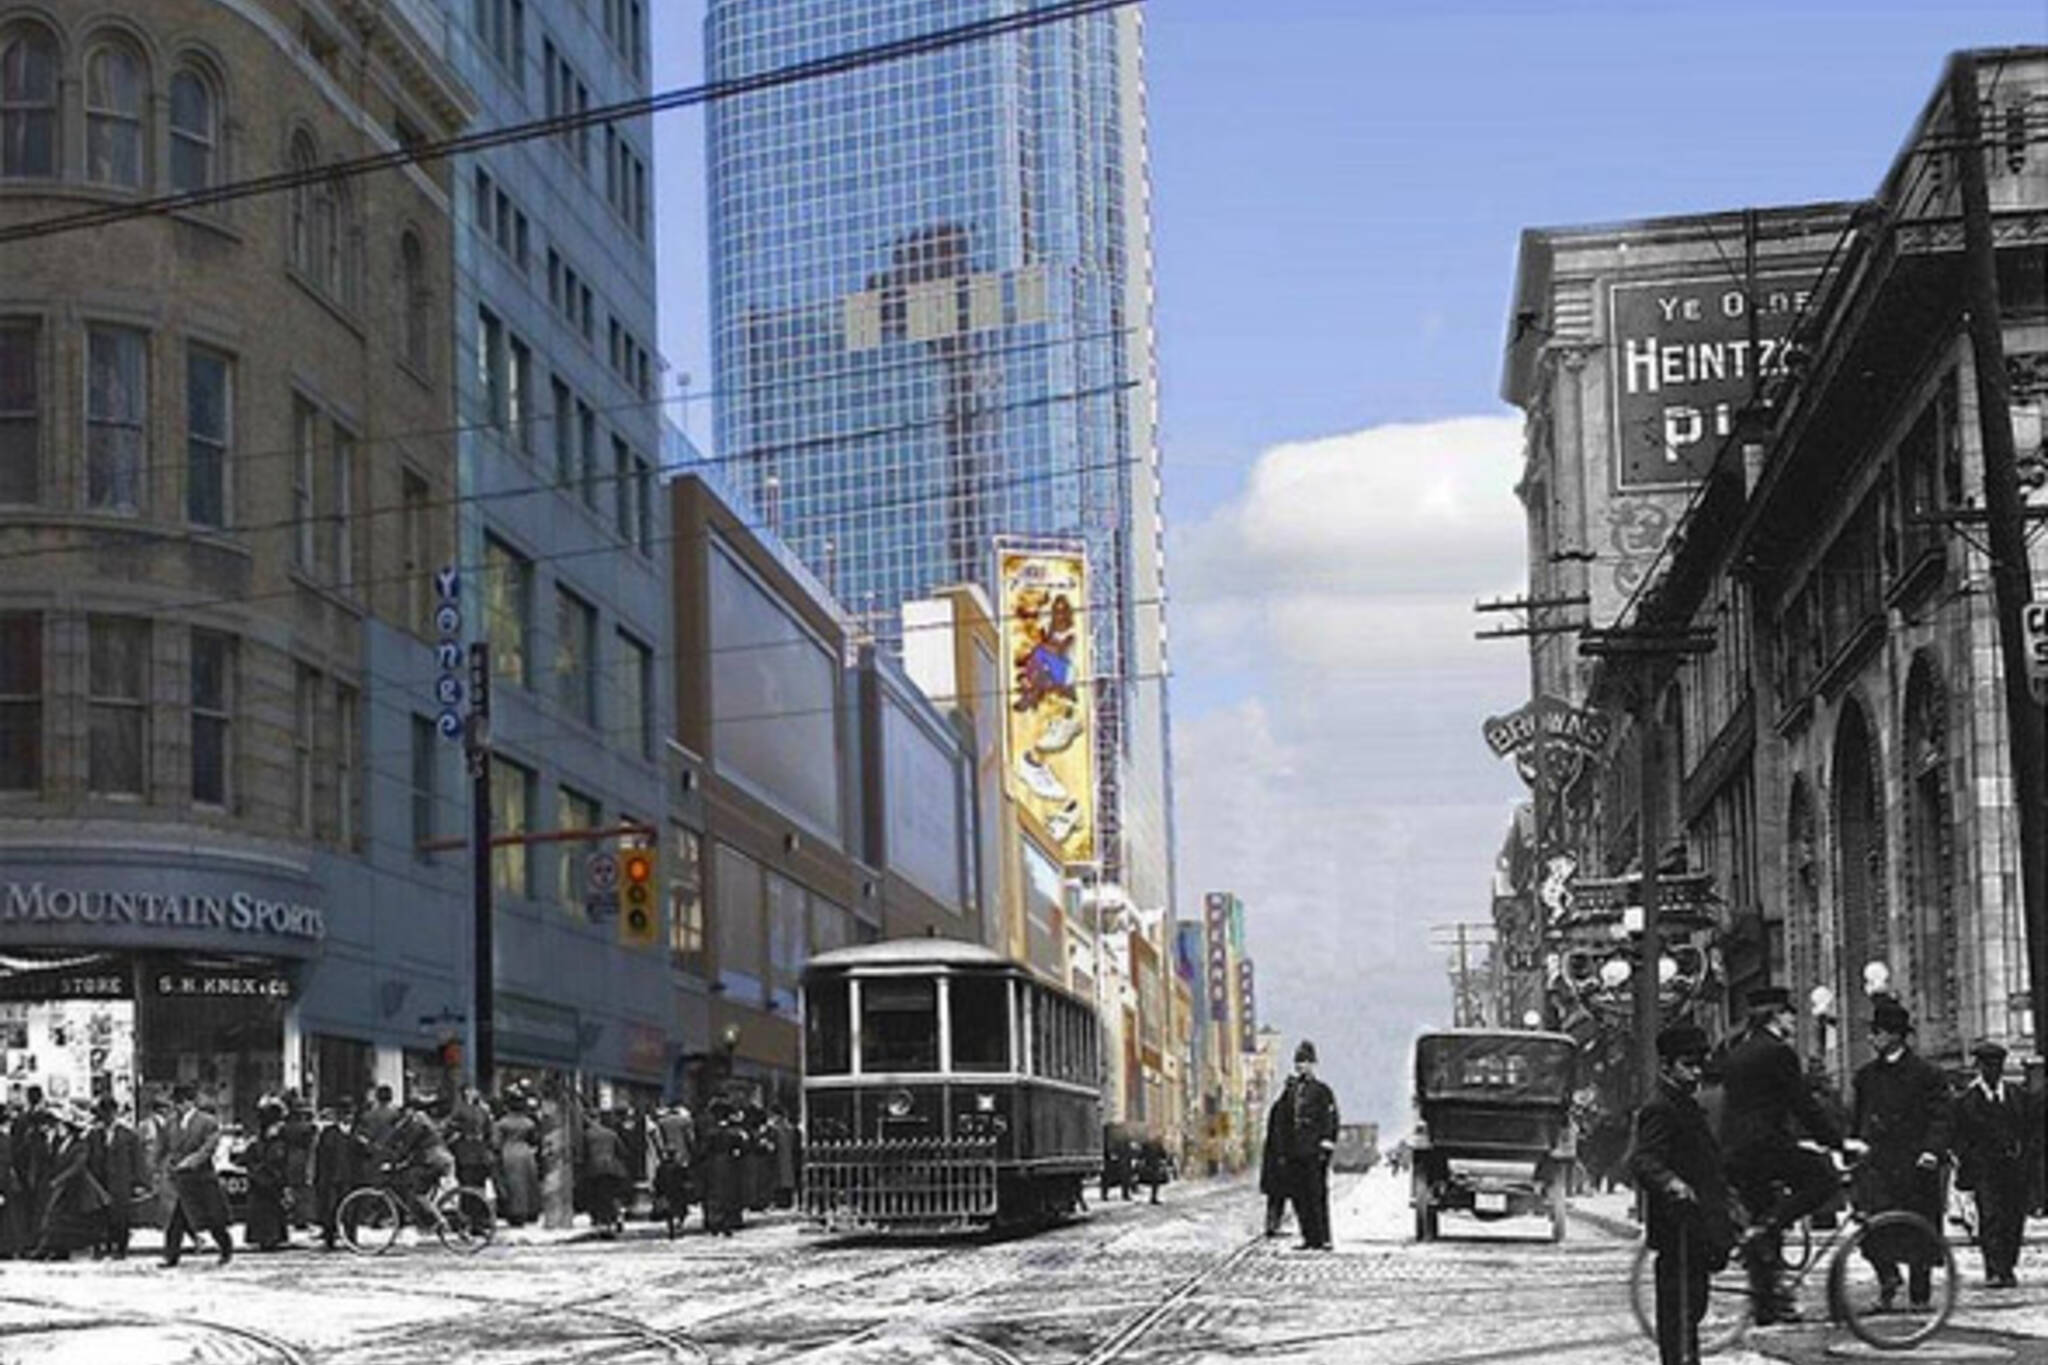 Then and Now photo Toronto